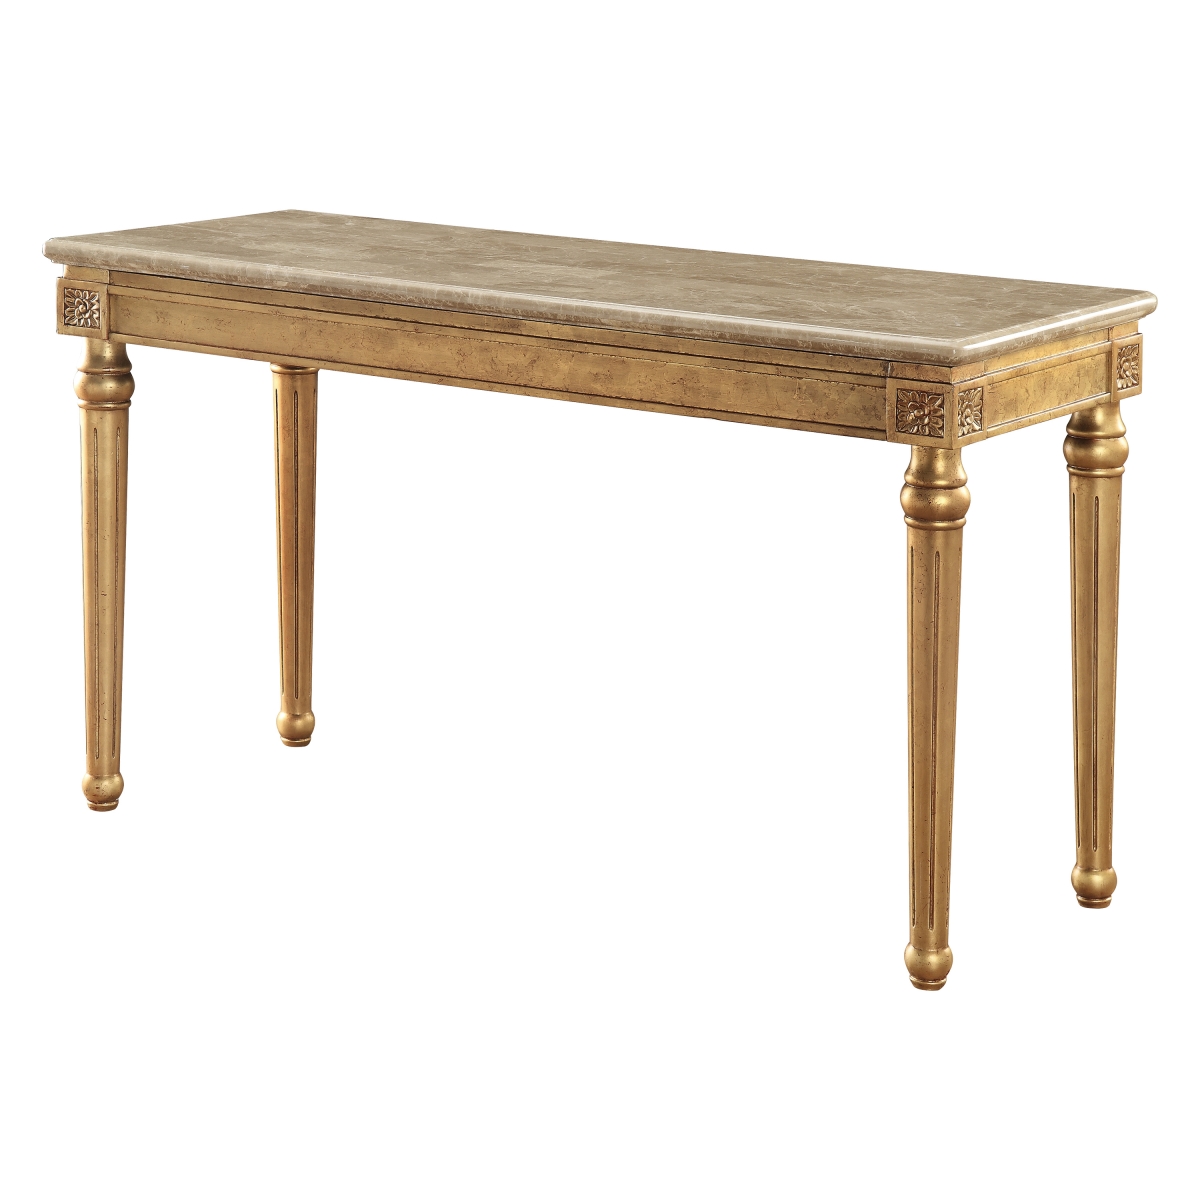 347417 22 X 57 X 37 In. Marble Antique Gold Wood Sofa Table